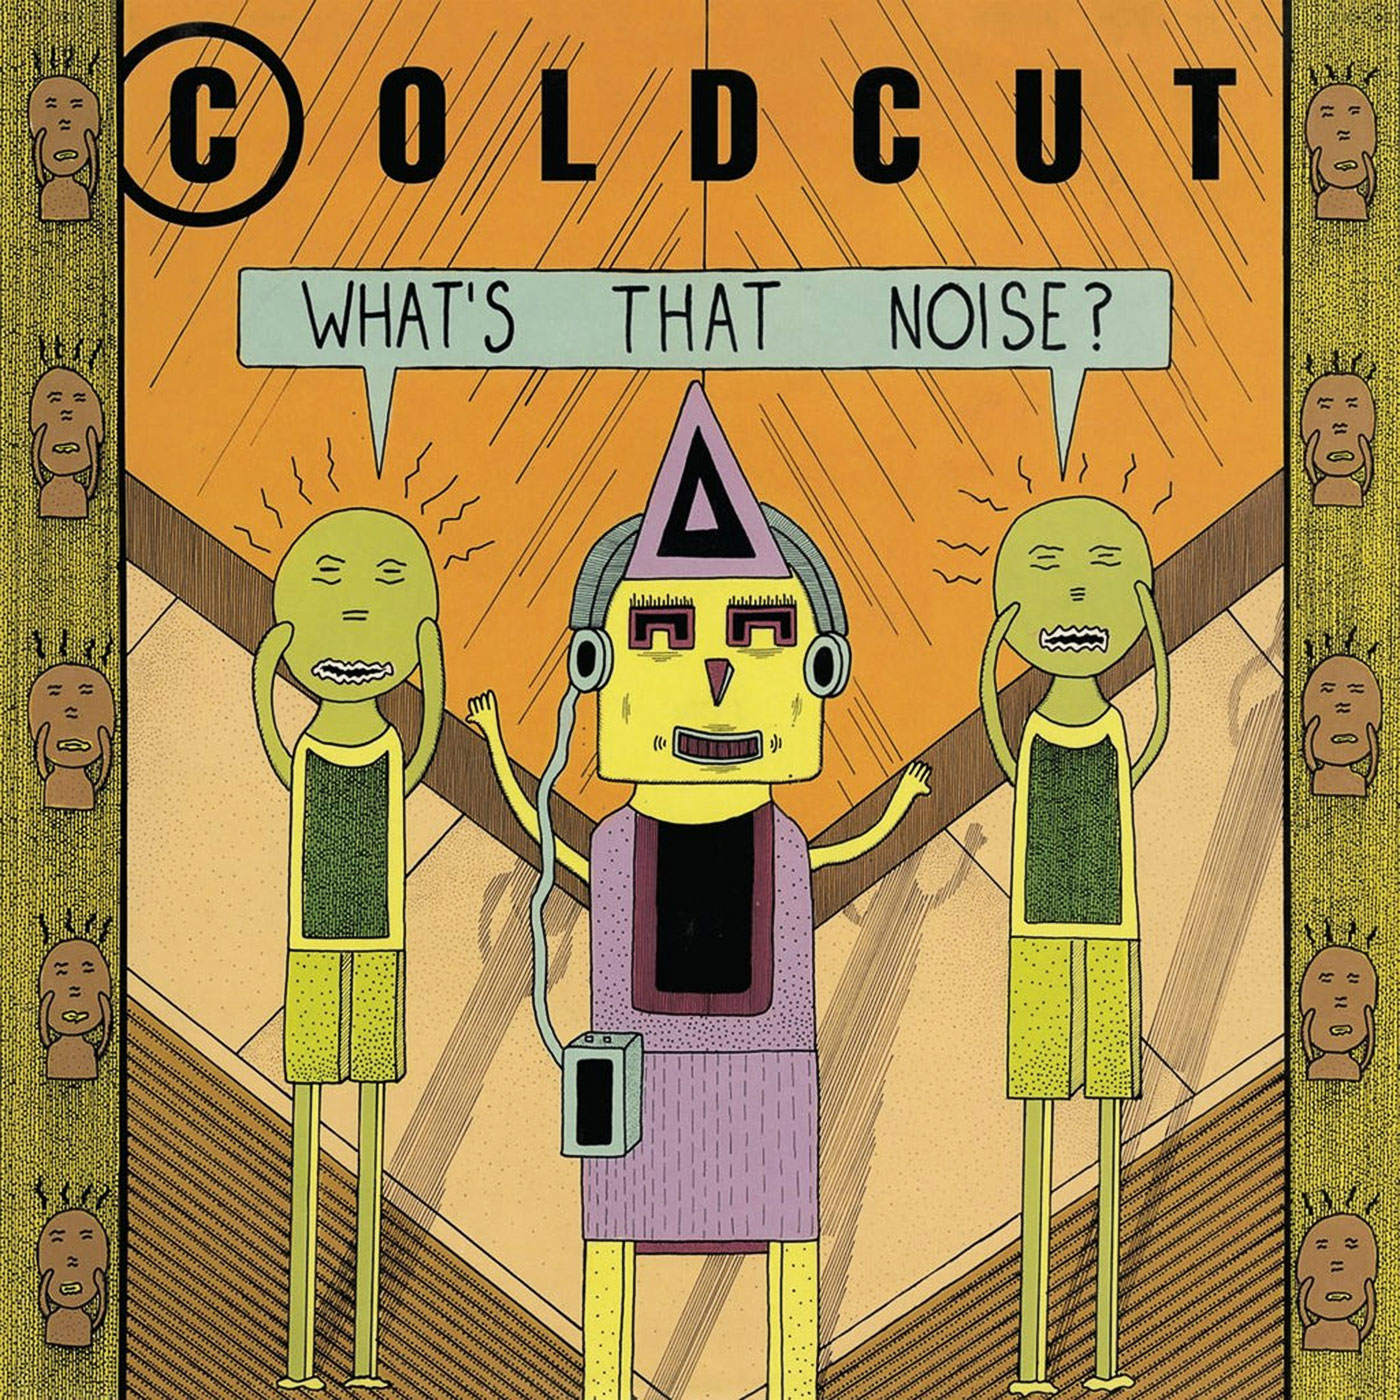 653 Coldcut – What’s That Noise